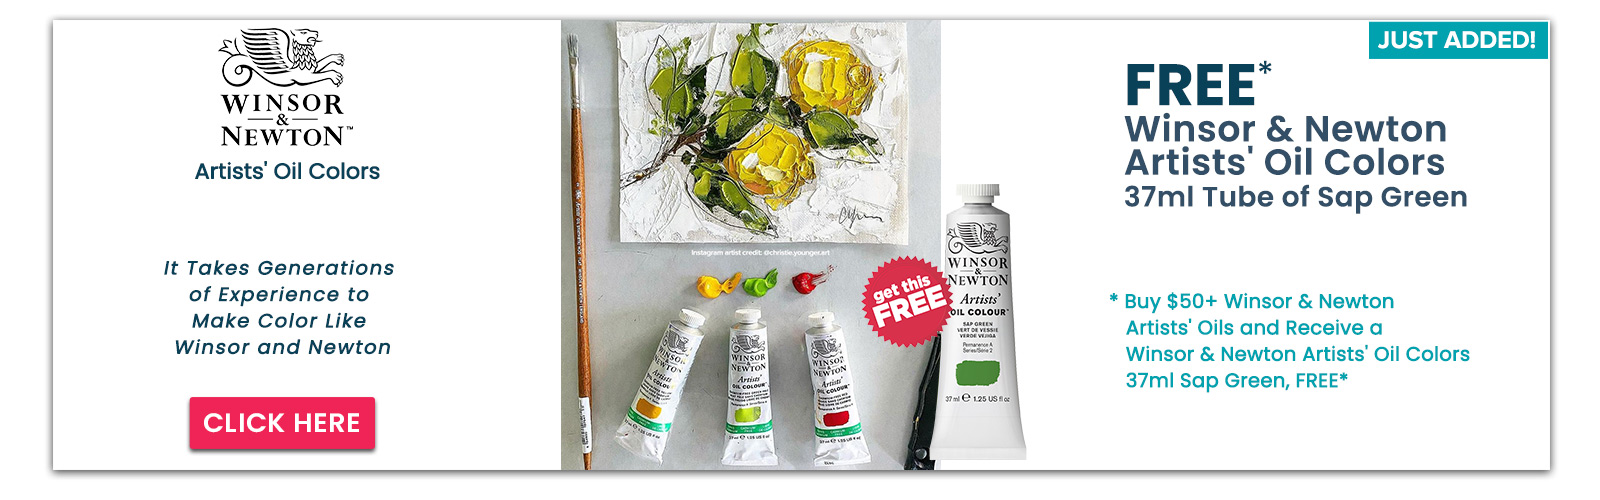 Winsor & Newton Artists' Oil Colors + Special Offer